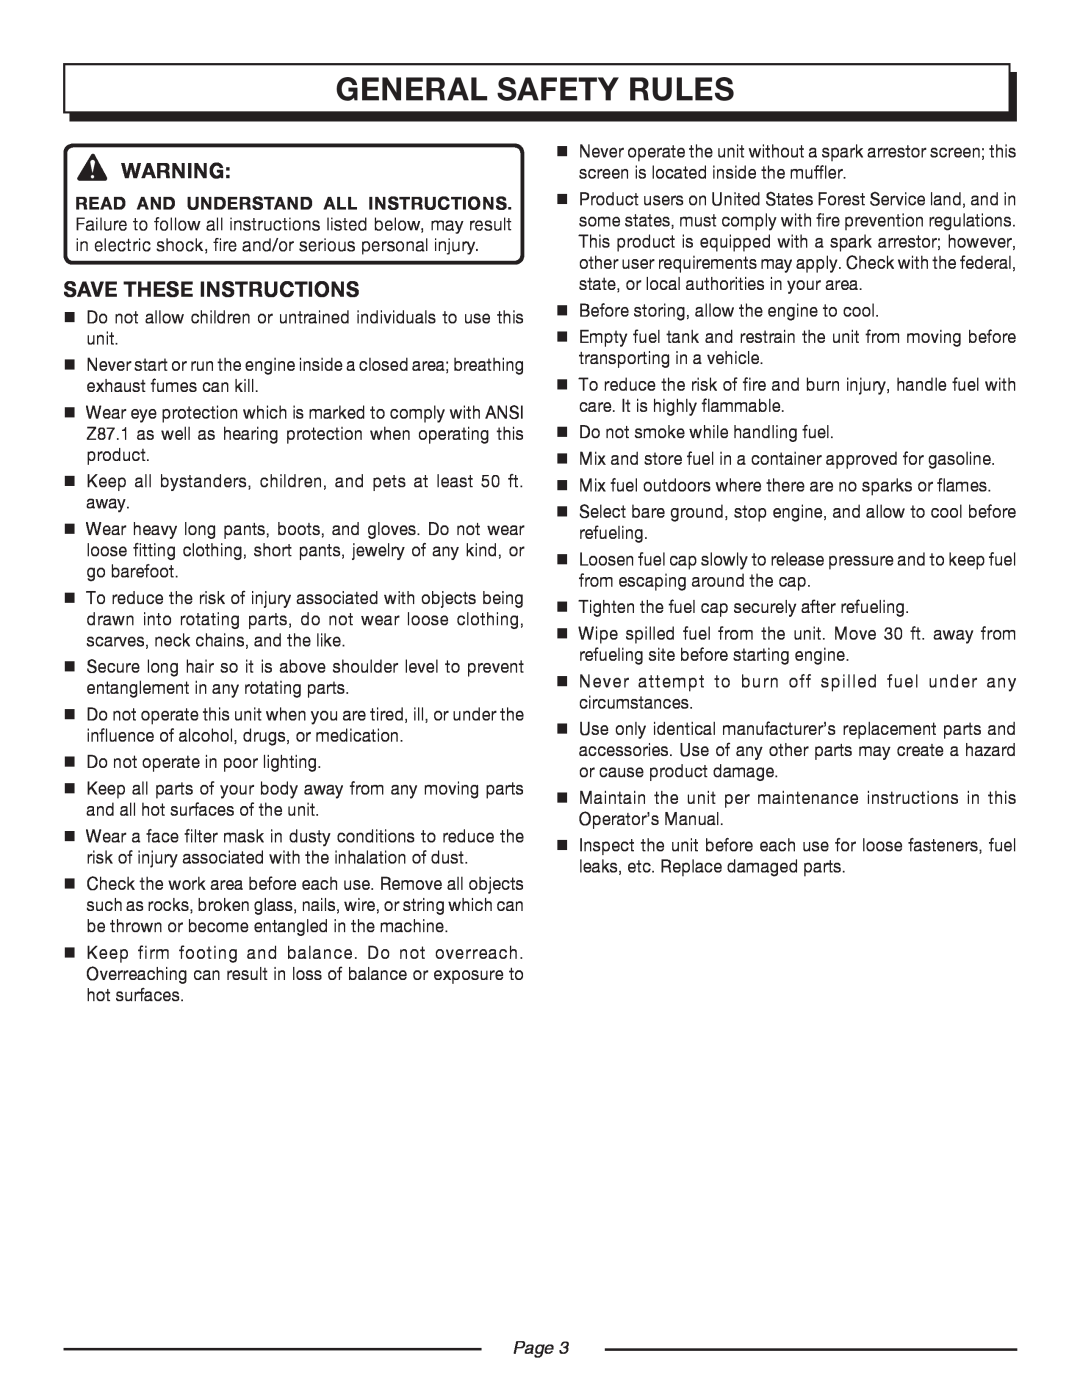 Homelite UT08550, UT08951 manual general safety rules, Save These Instructions, Page  